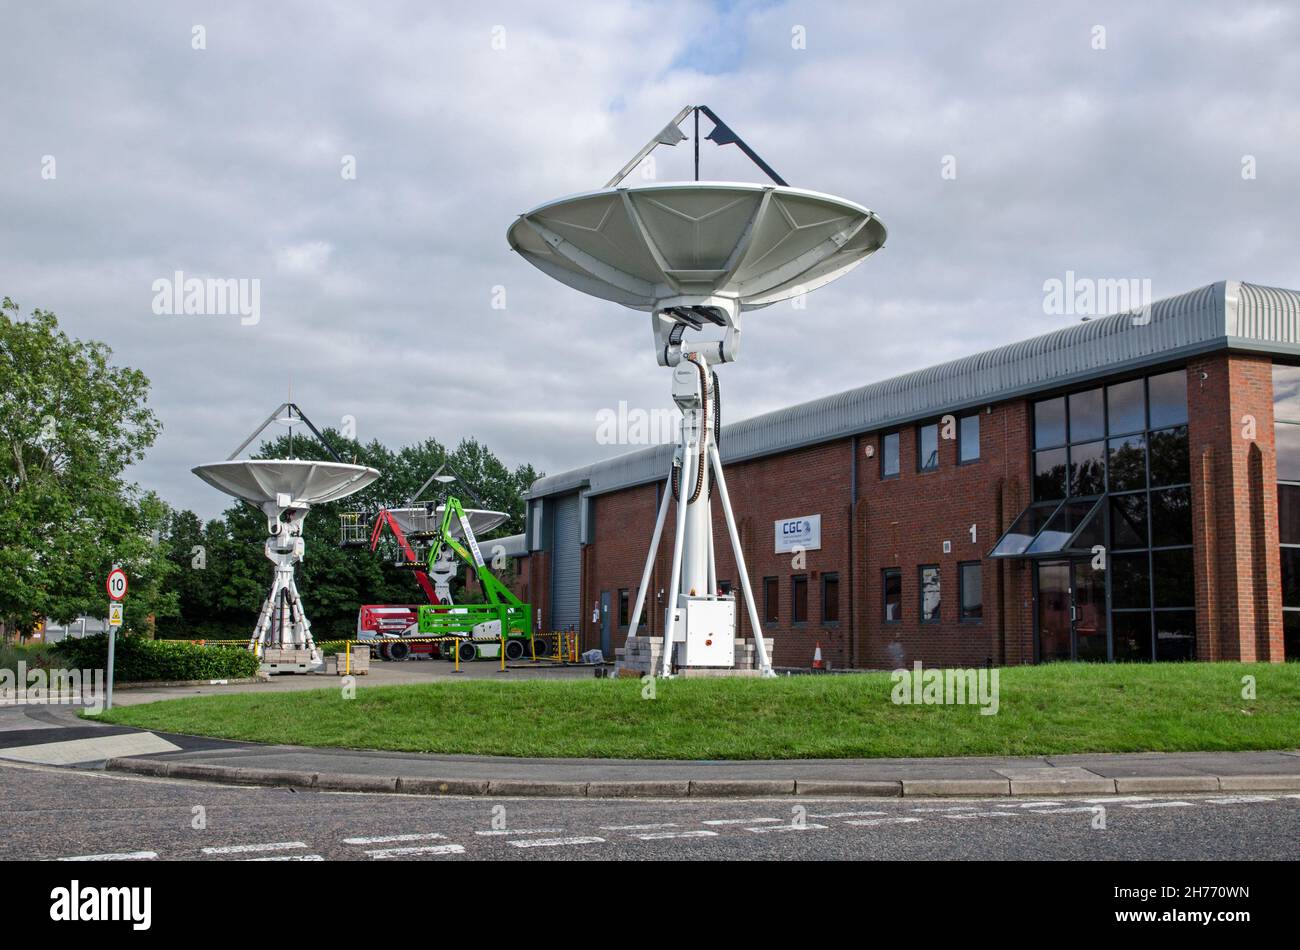 Basingstoke, UK - July 3, 2021: Satellite uplink dishes outside the offices of CGC Technology Systems, now part of Comtech Ground Systems in the Chine Stock Photo